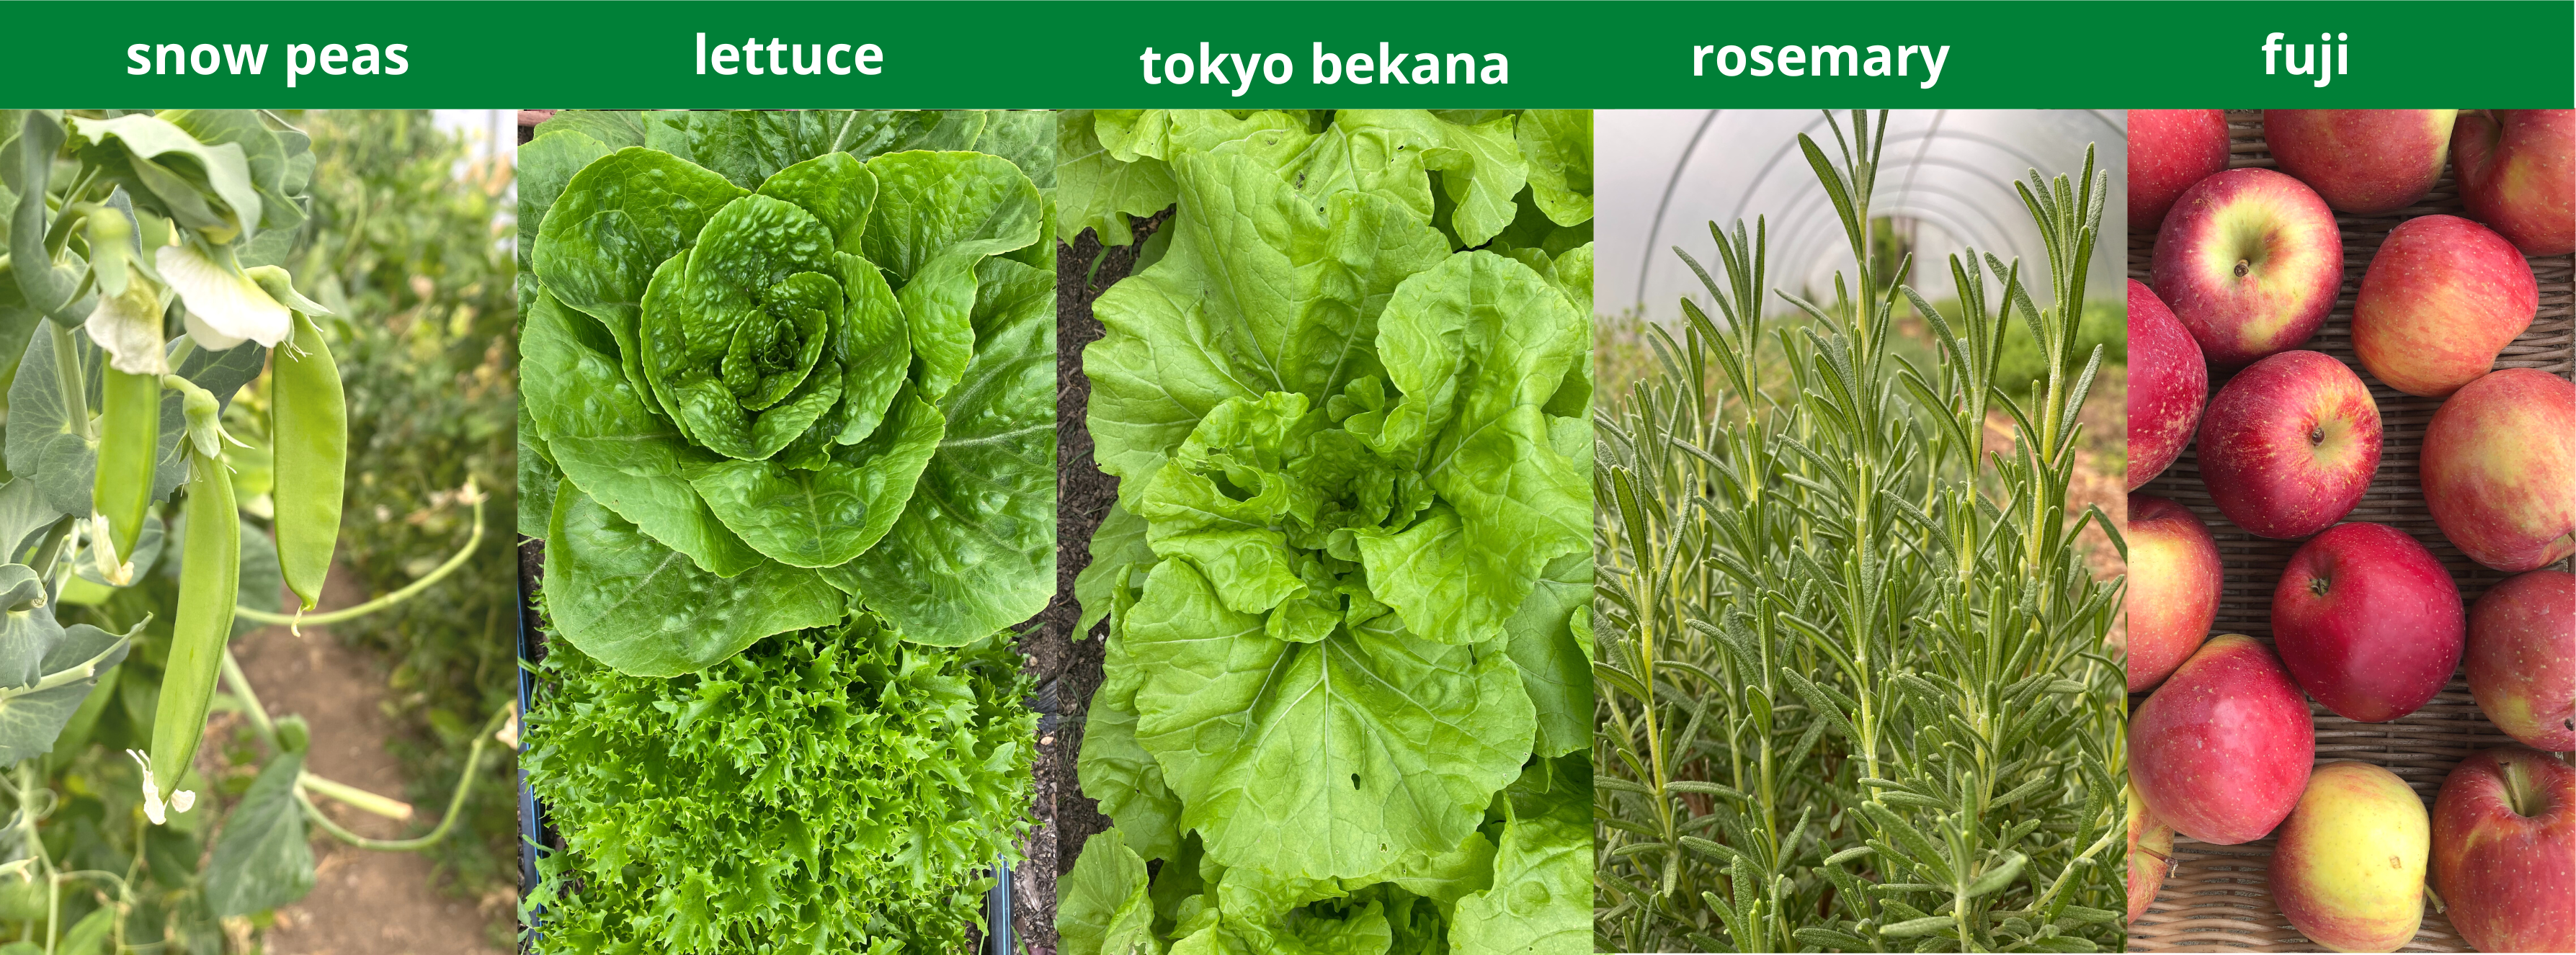 Pictured left to right: 3 snow peas dangling from a plant, a romaine and leaf lettuce, Tokyo bekana, rosemary, and fuji apples